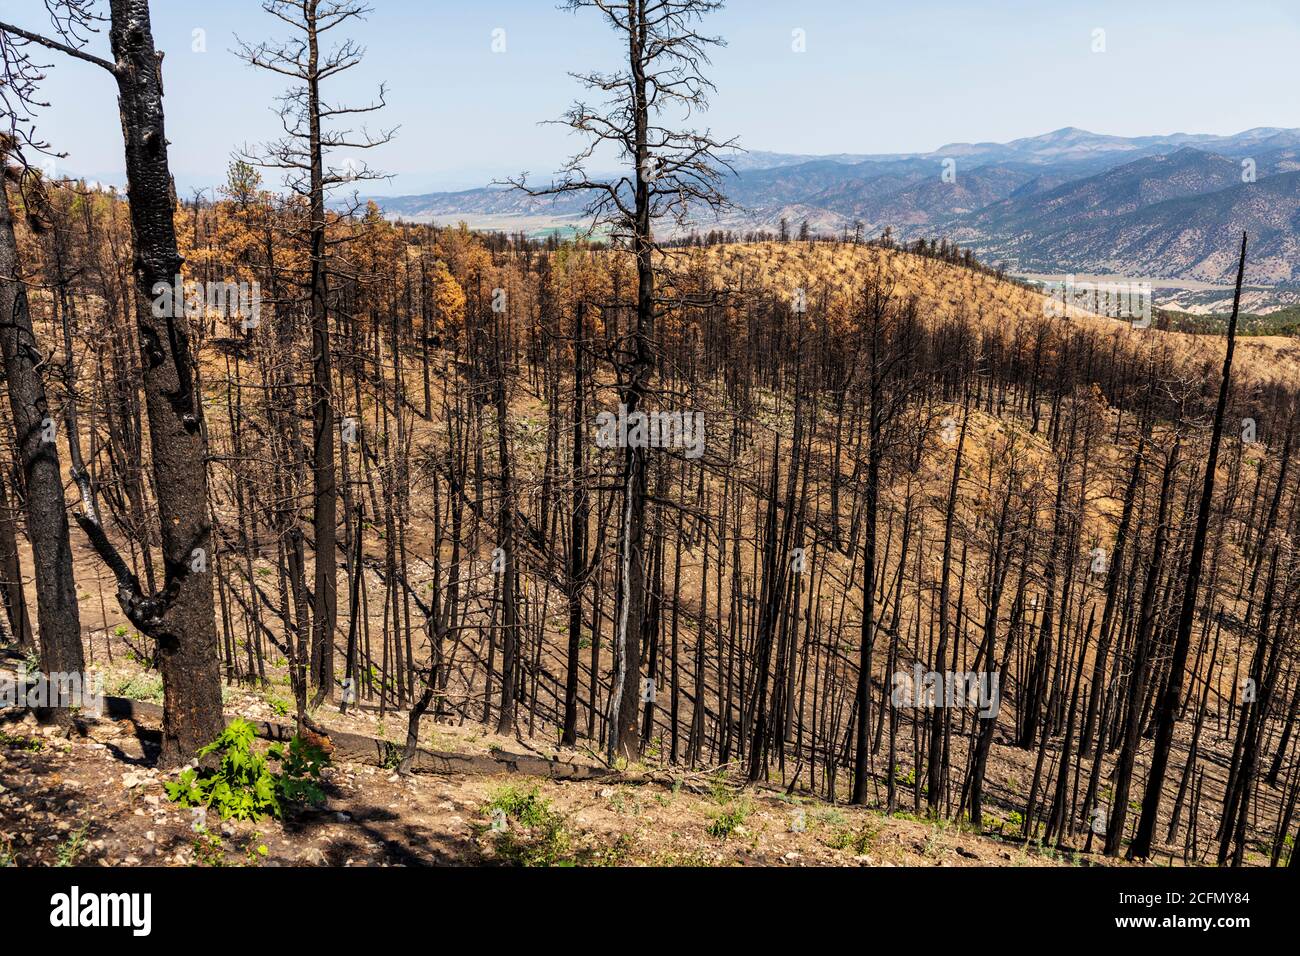 Regeneration of trees & plants that burned in forest fire; Rocky Mountains, Central Colorado, USA Stock Photo